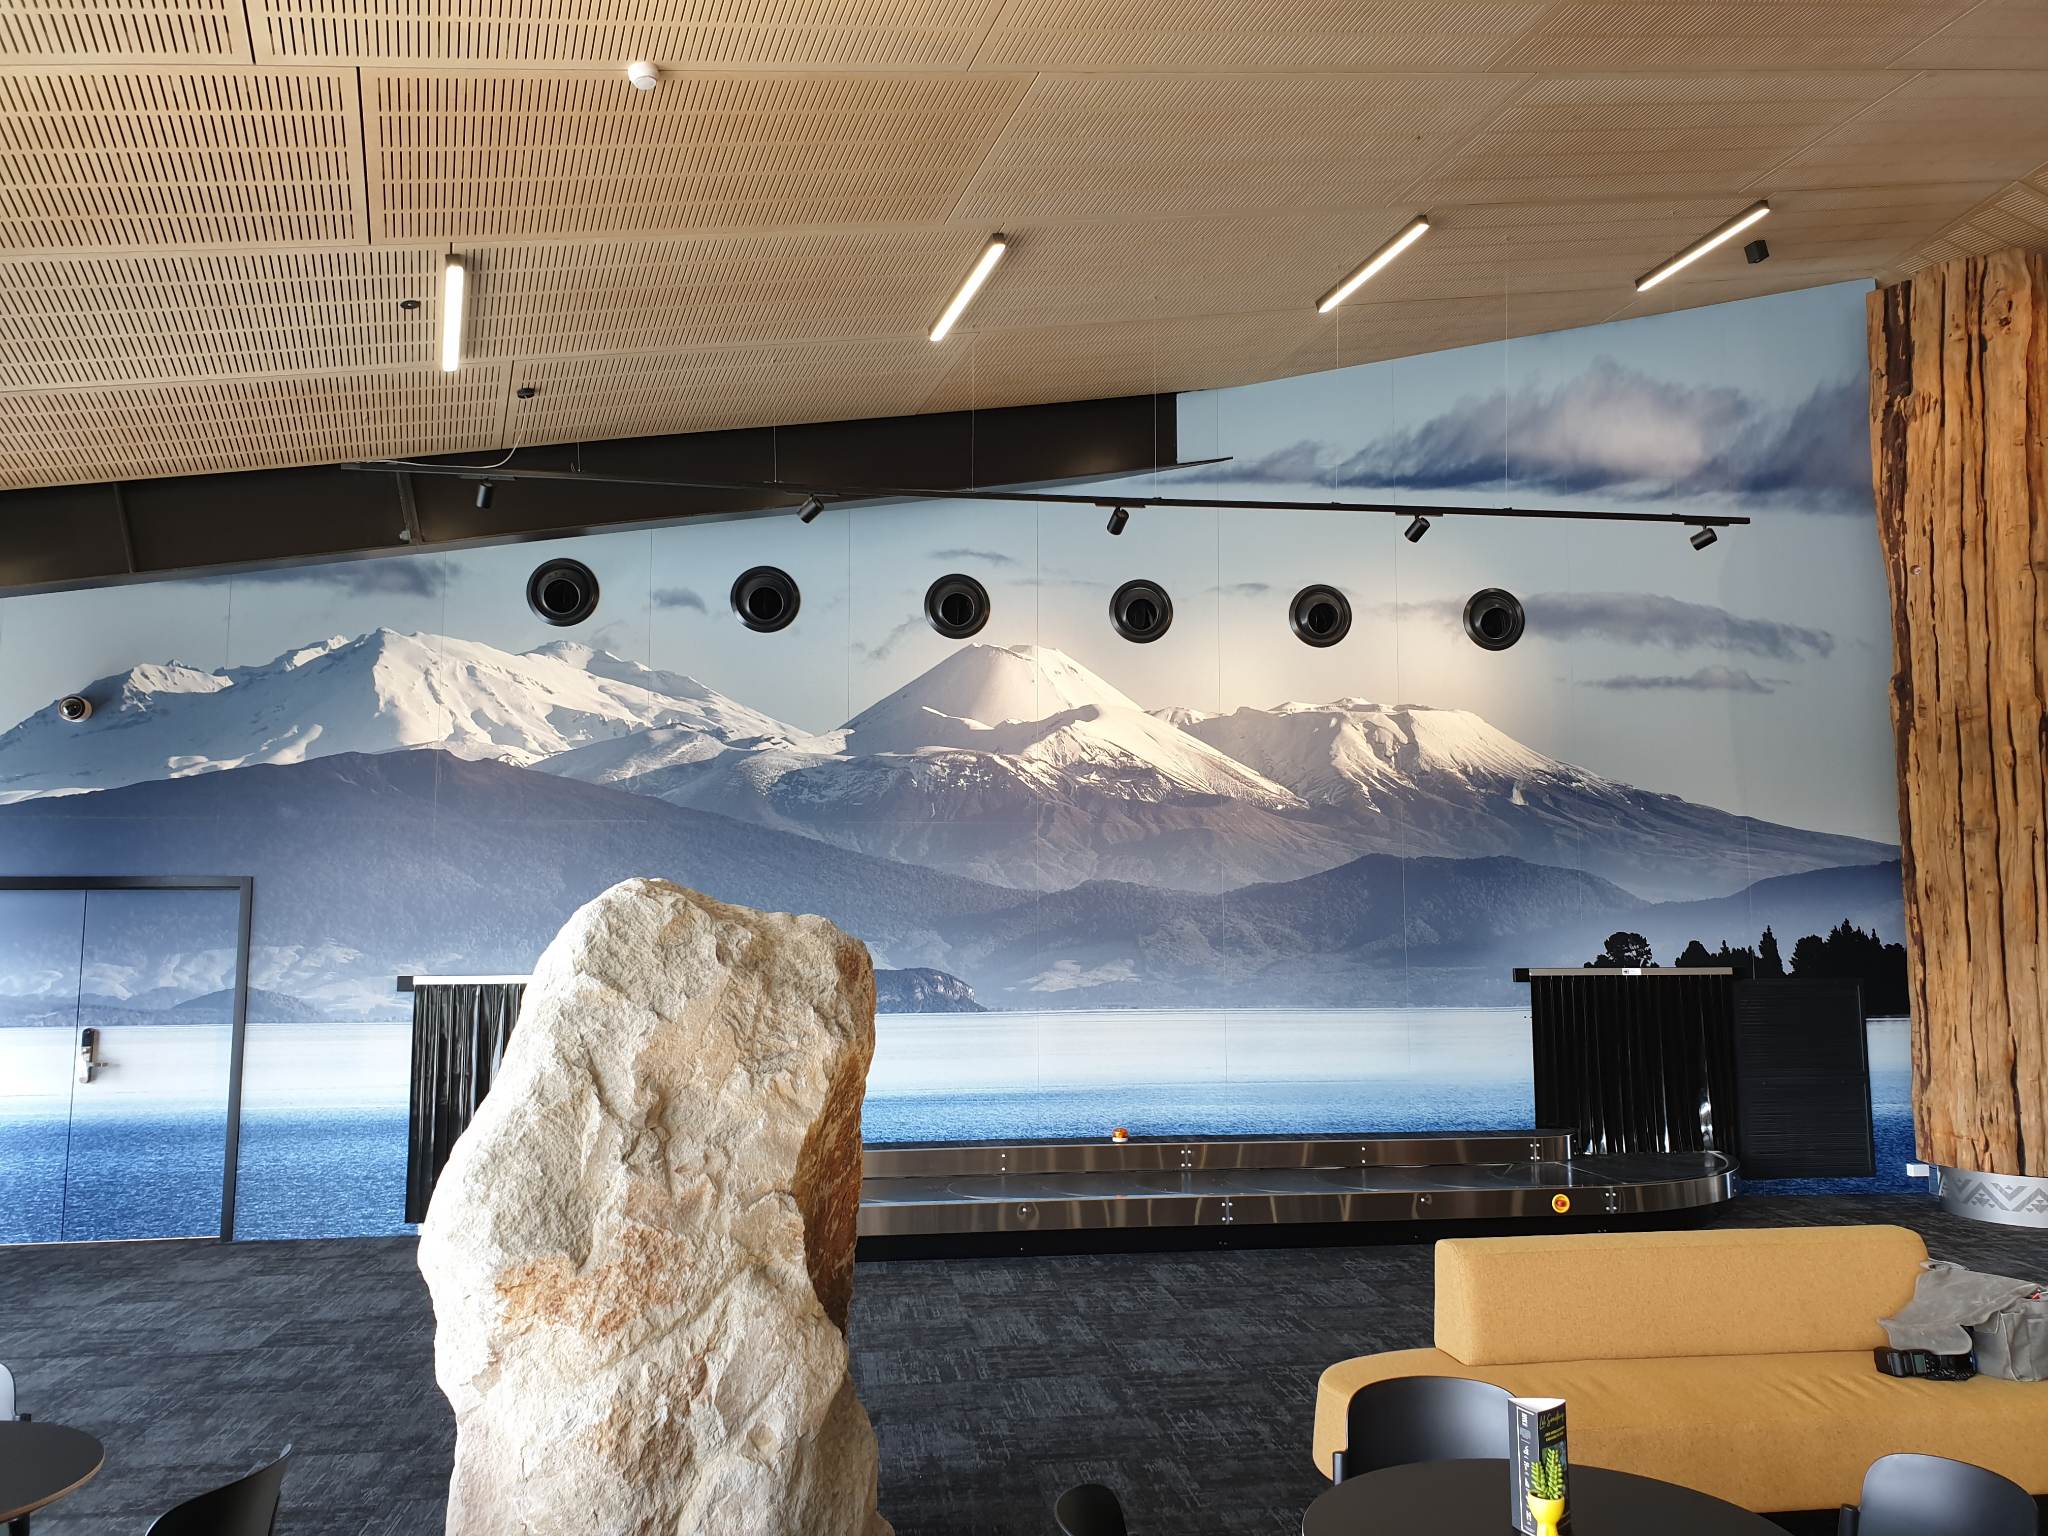 Taupo Airport Commercial Electrical Project - lighting